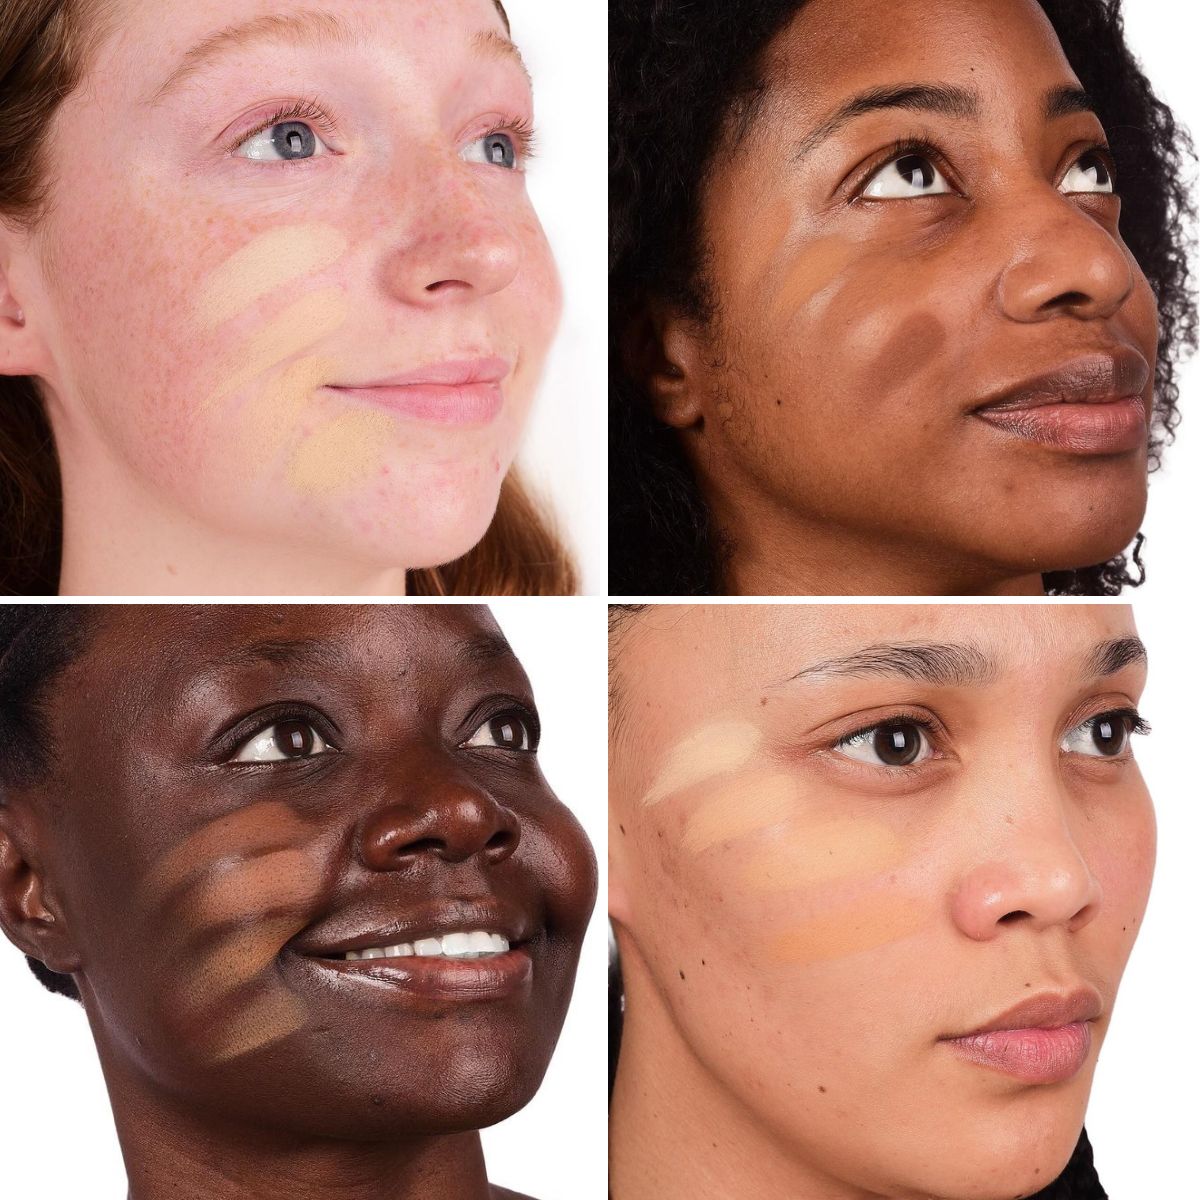 How To Pick The Right Foundation Shade When Online Shopping